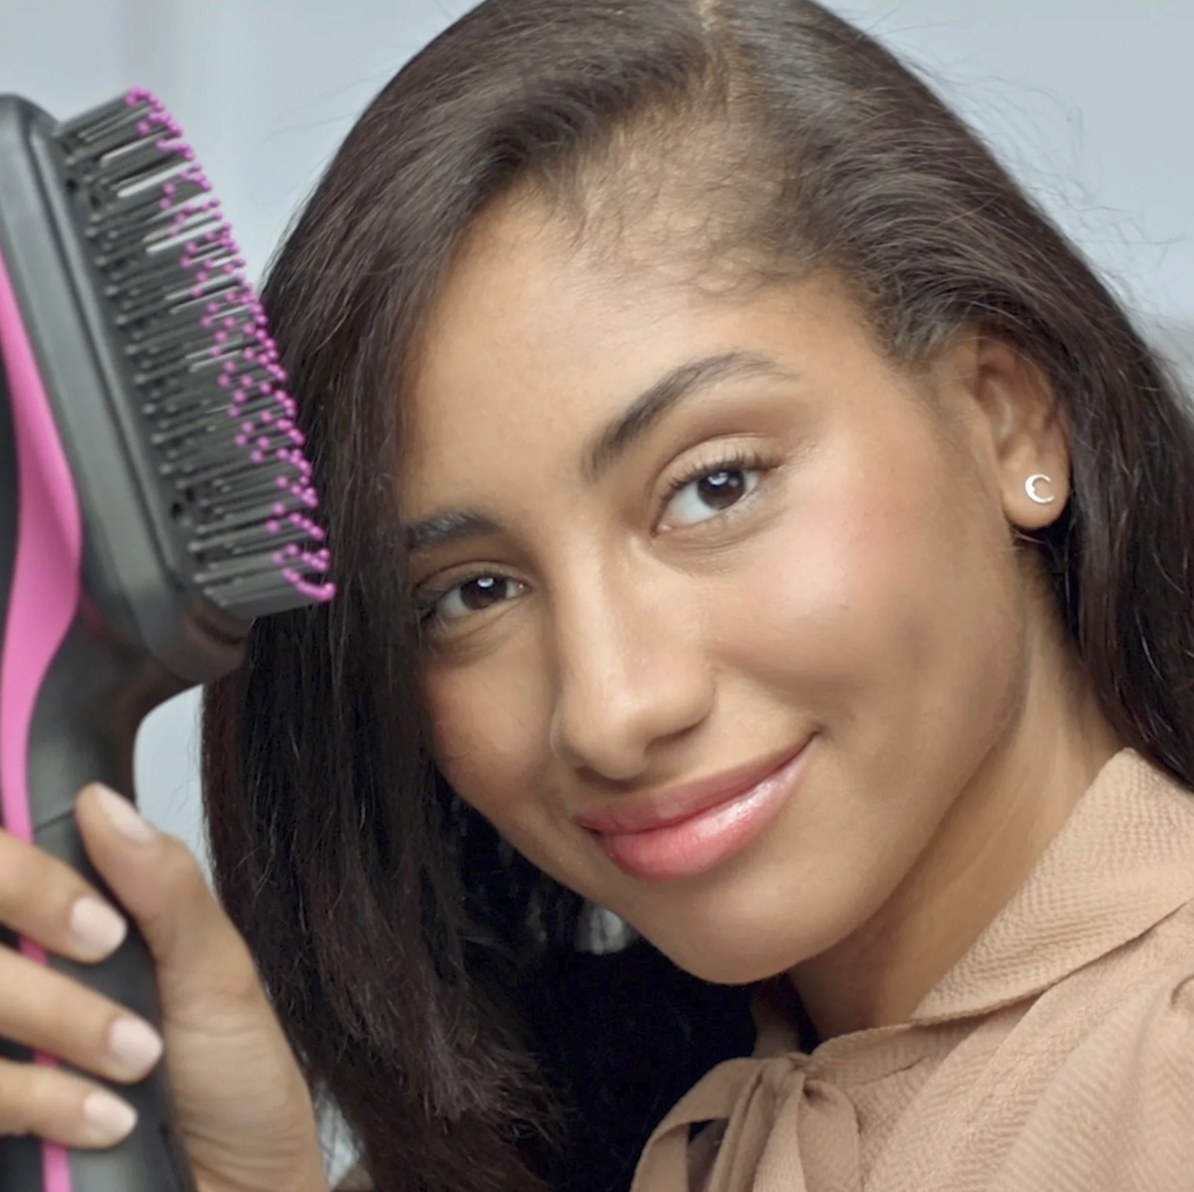 a model holding the hairbrush-style hair dryer